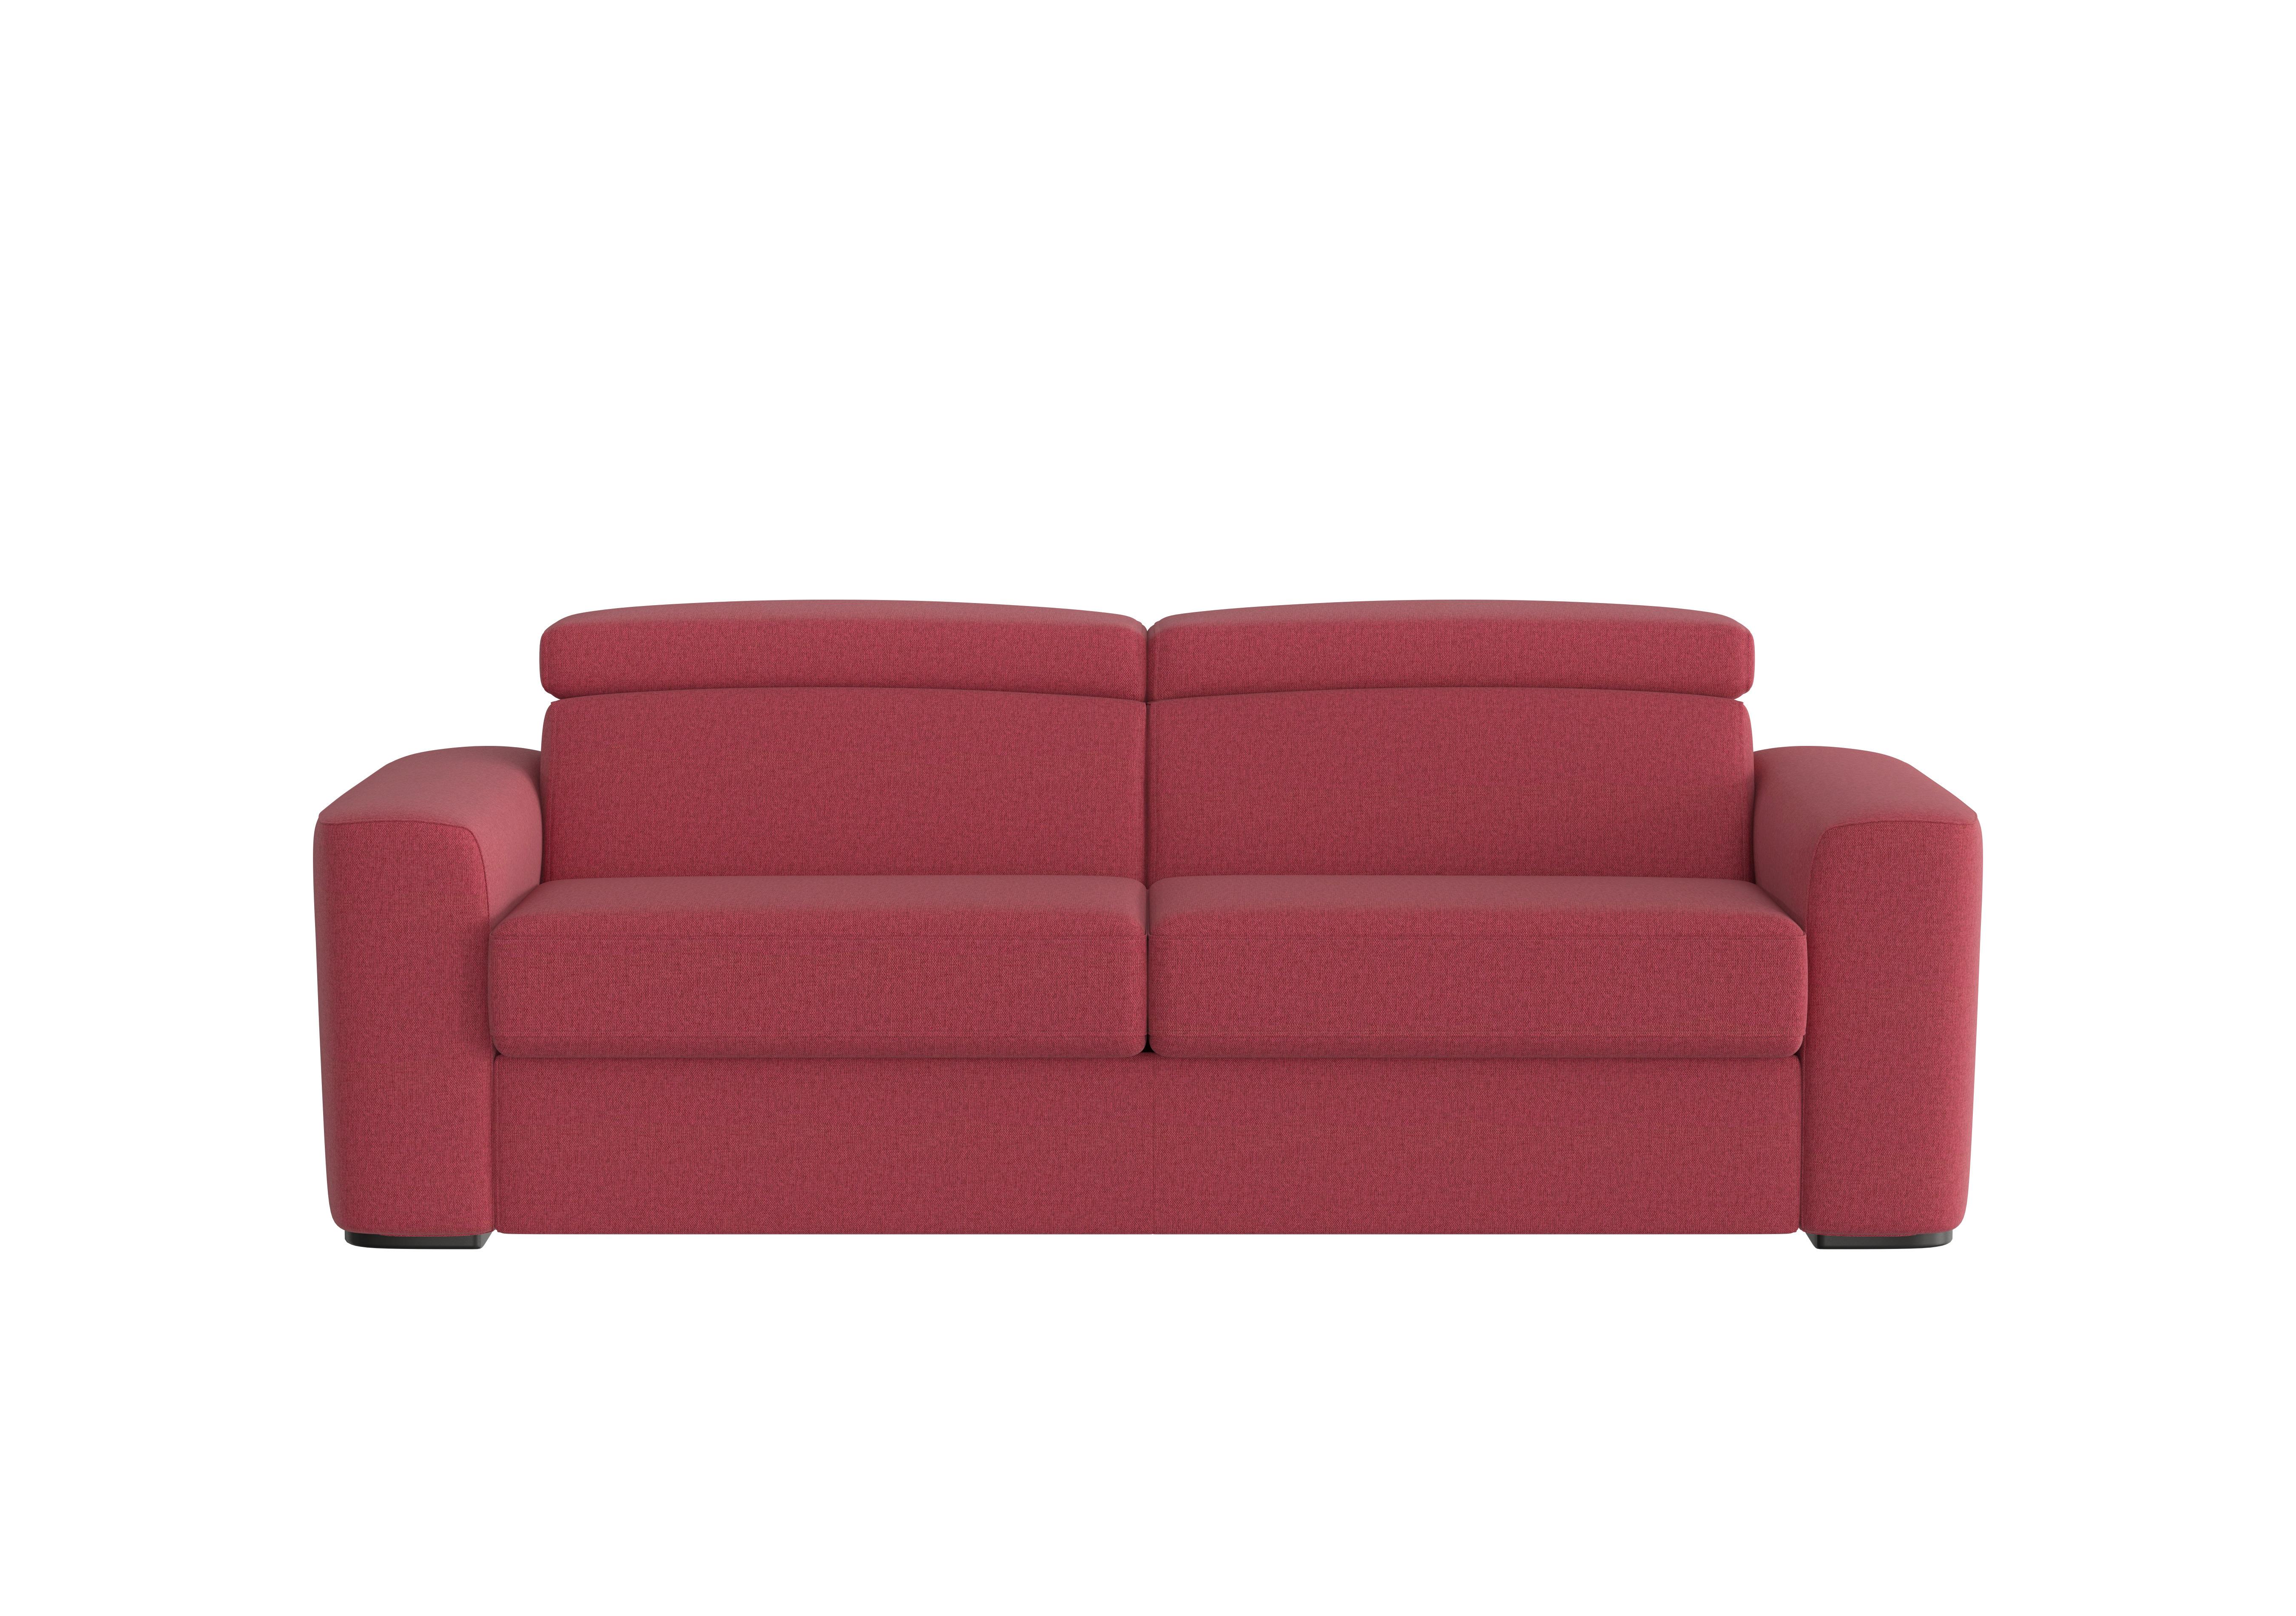 Infinity 3 Seater Fabric Sofa Bed in Fab-Blt-R29 Red on Furniture Village